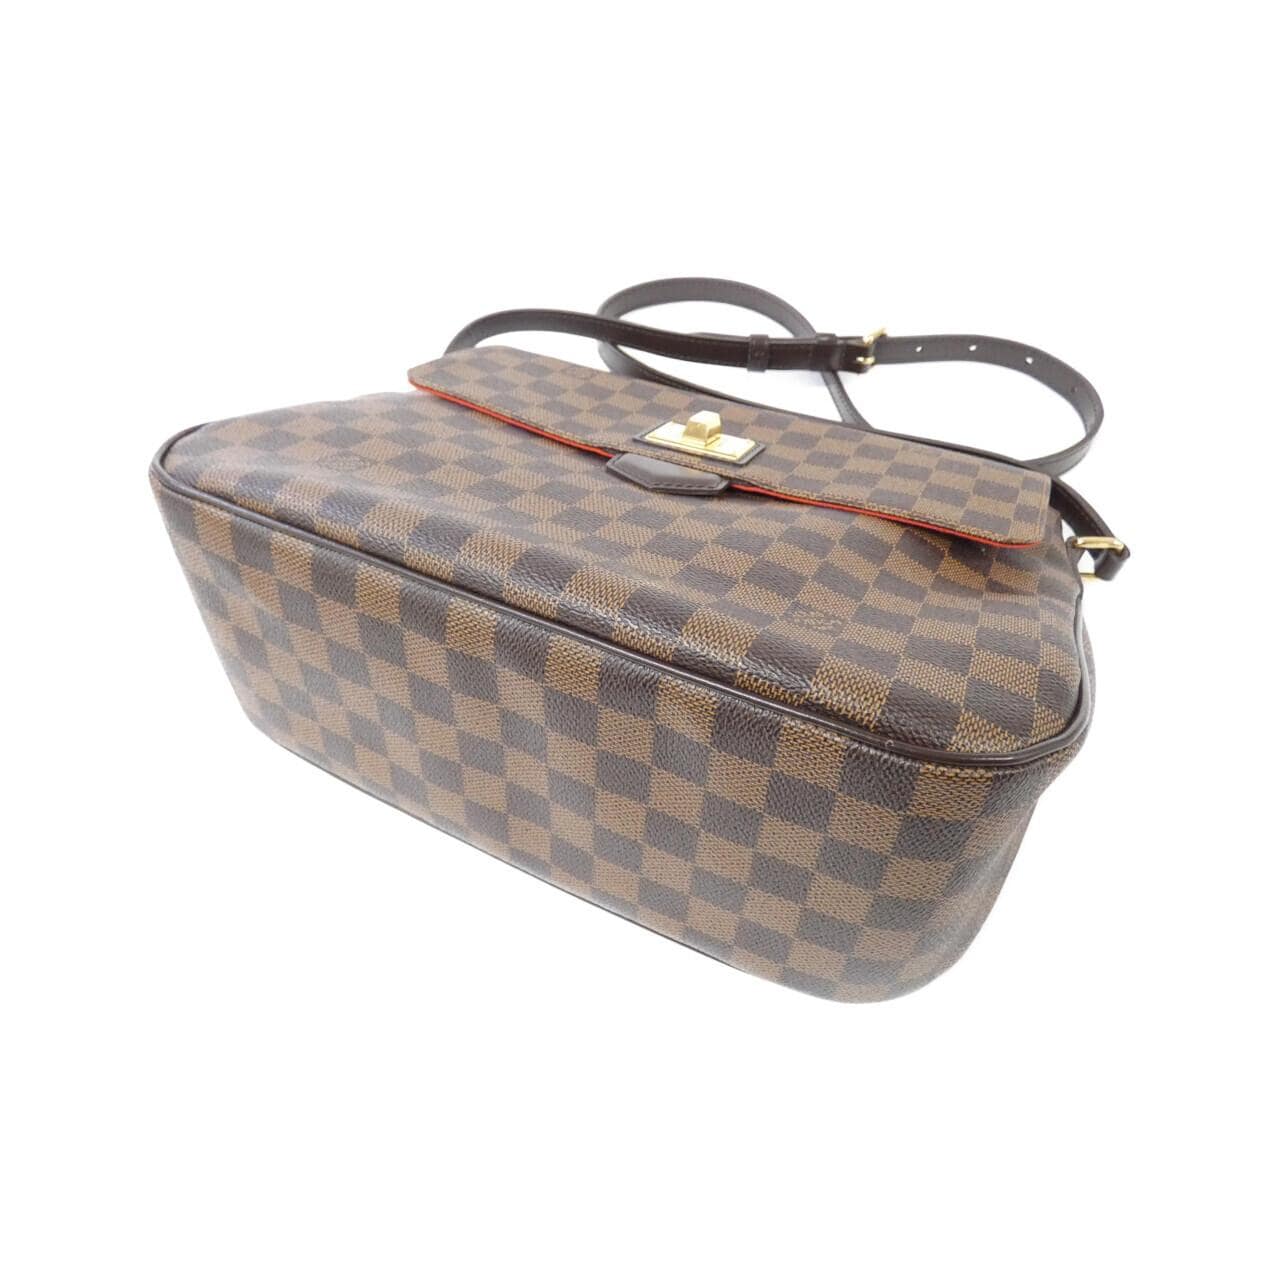 LOUIS VUITTON ダミエ ブザス・ローズベリー N41178 バッグ